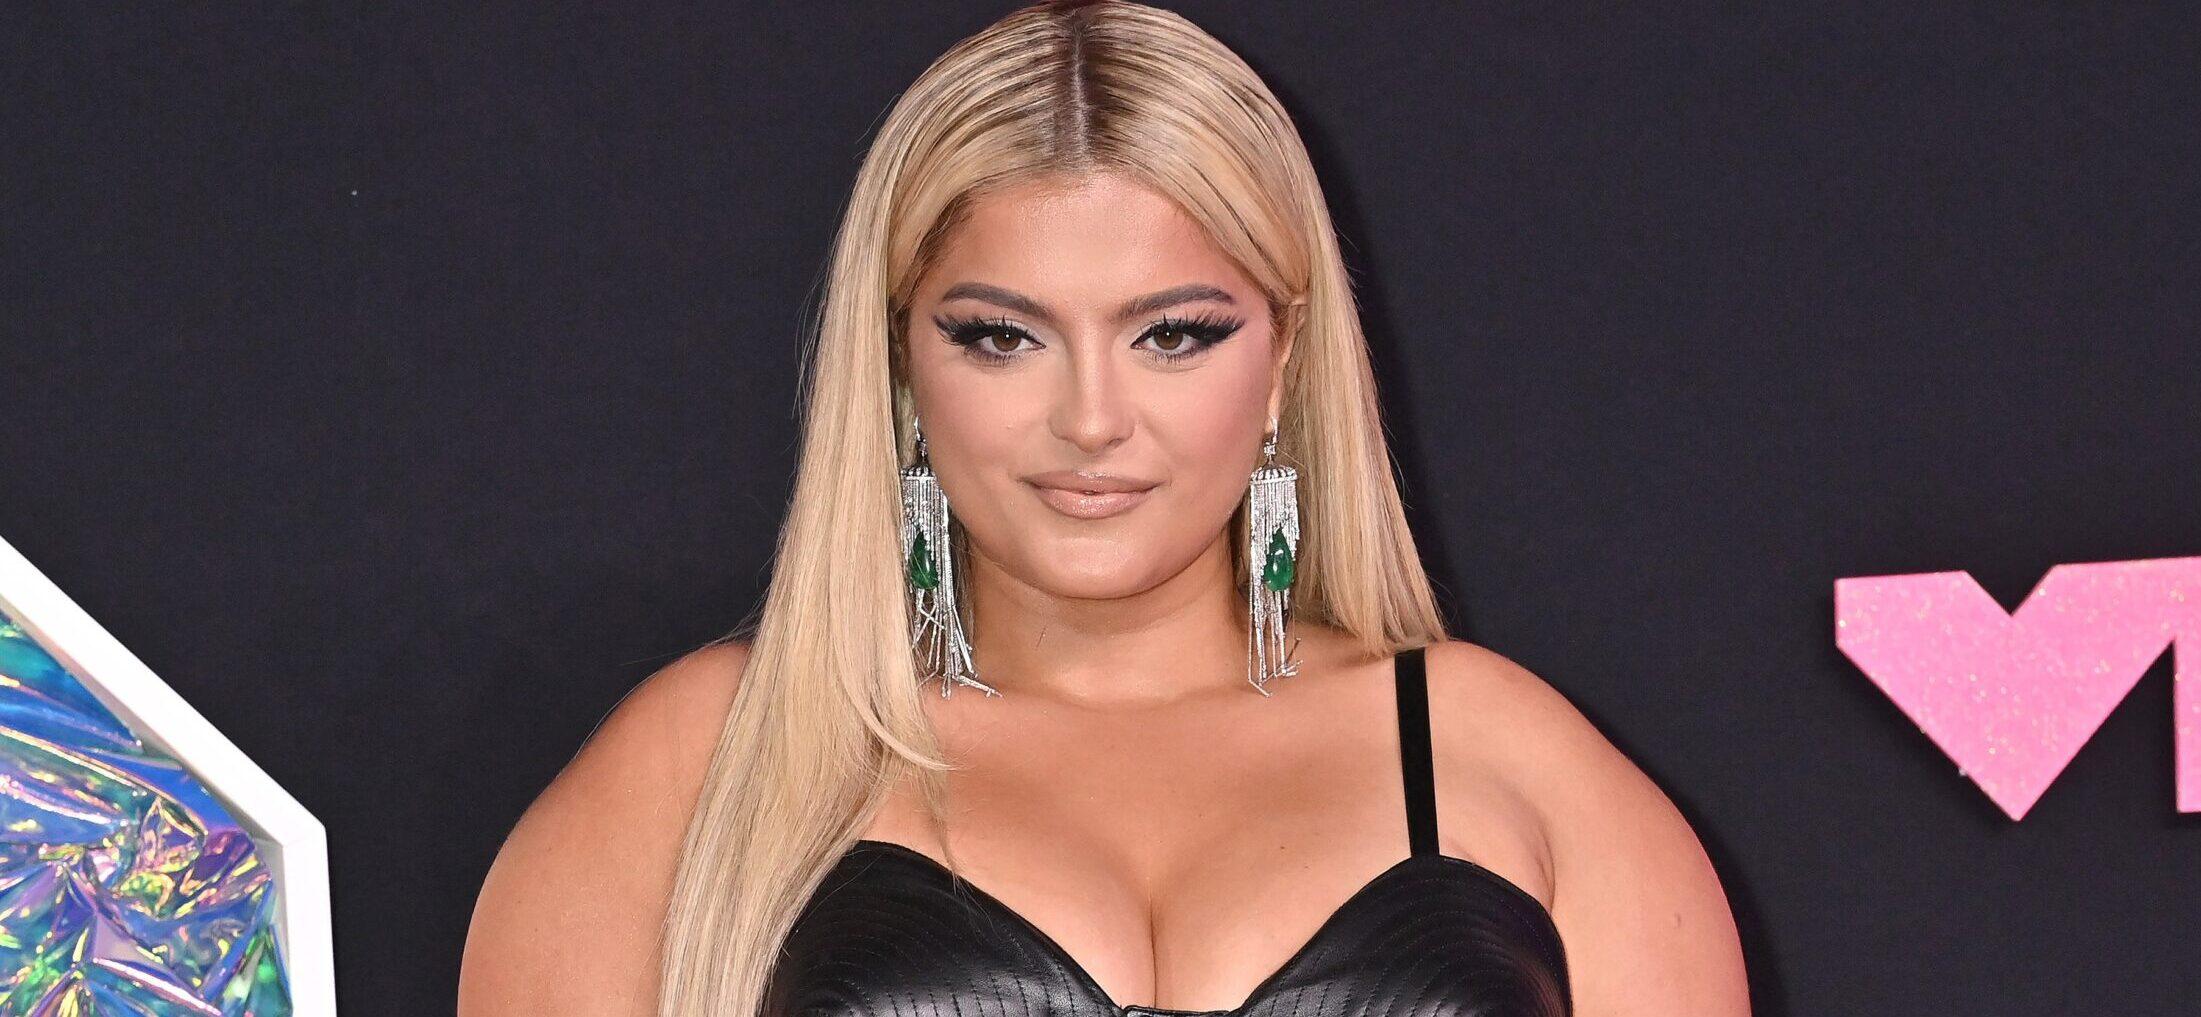 Bebe Rexha ‘Drunk Posted’ Blank Snaps After Taking Selfies With TXT’s Soobin At VMAs